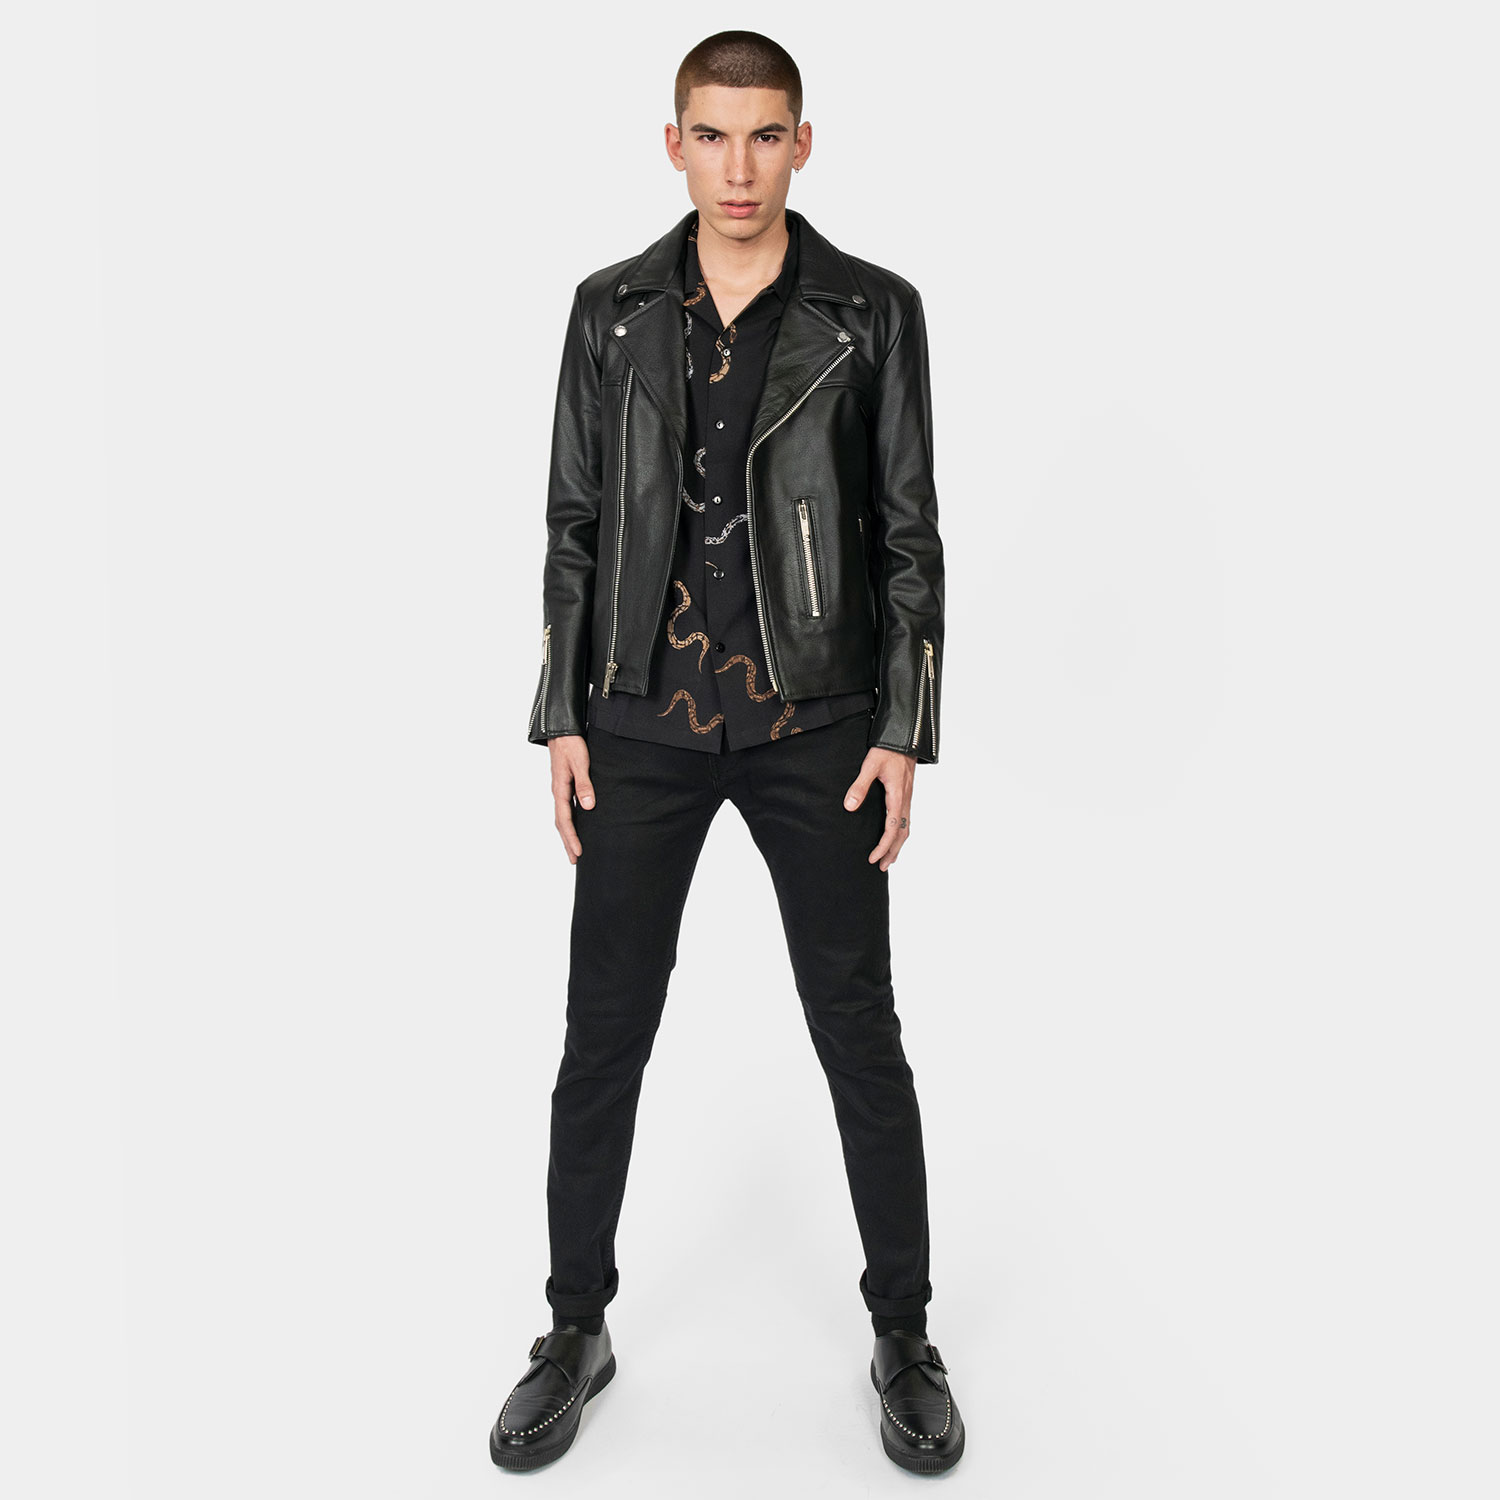 Straight to Hell Men's Bristol Leather Jacket